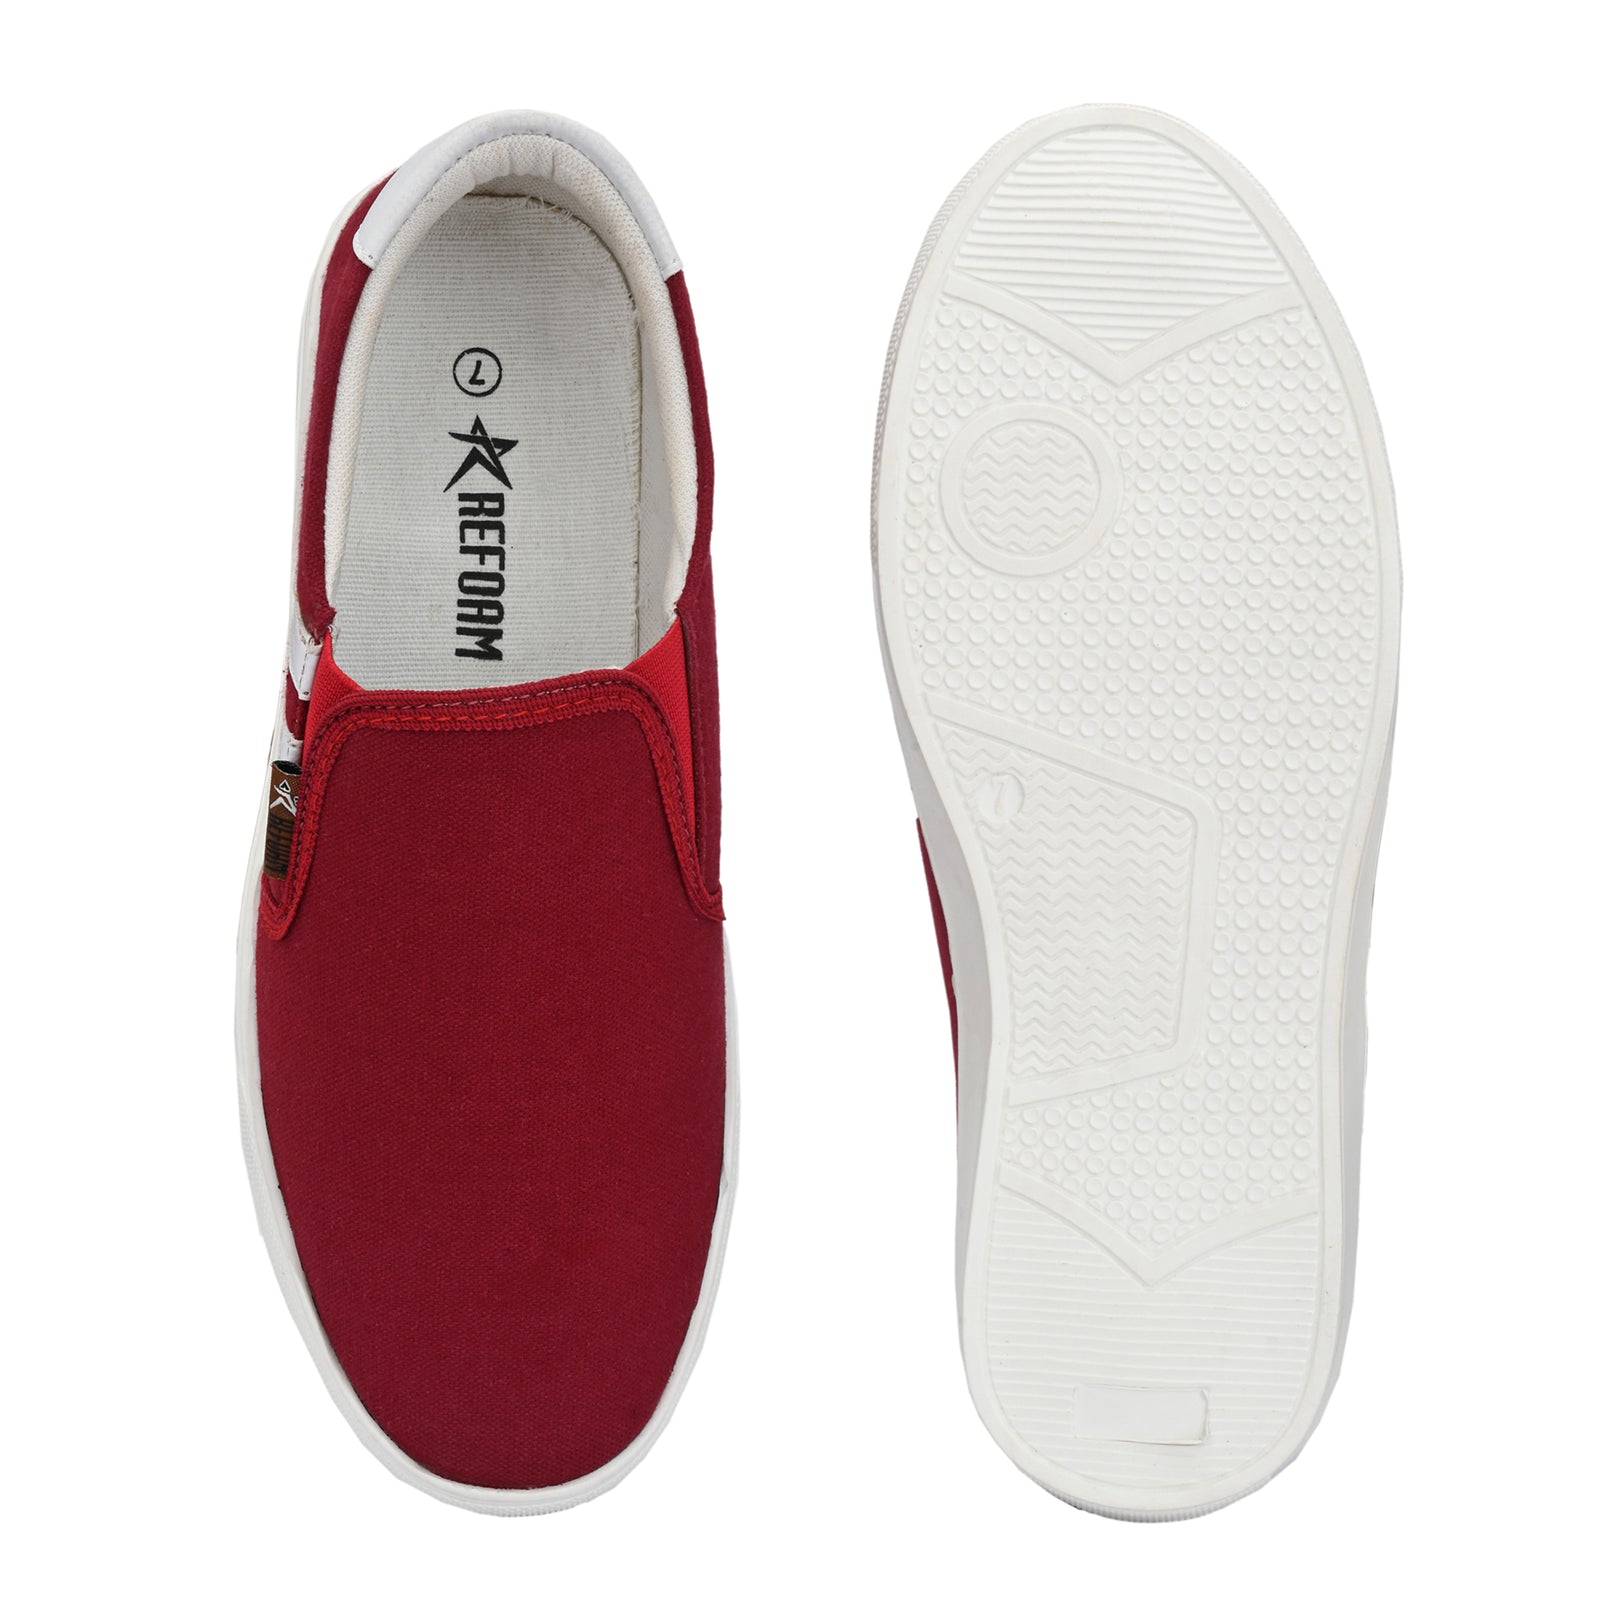 Maroon Solid Canvas Slip On Lifestyle Casual Shoes For Men